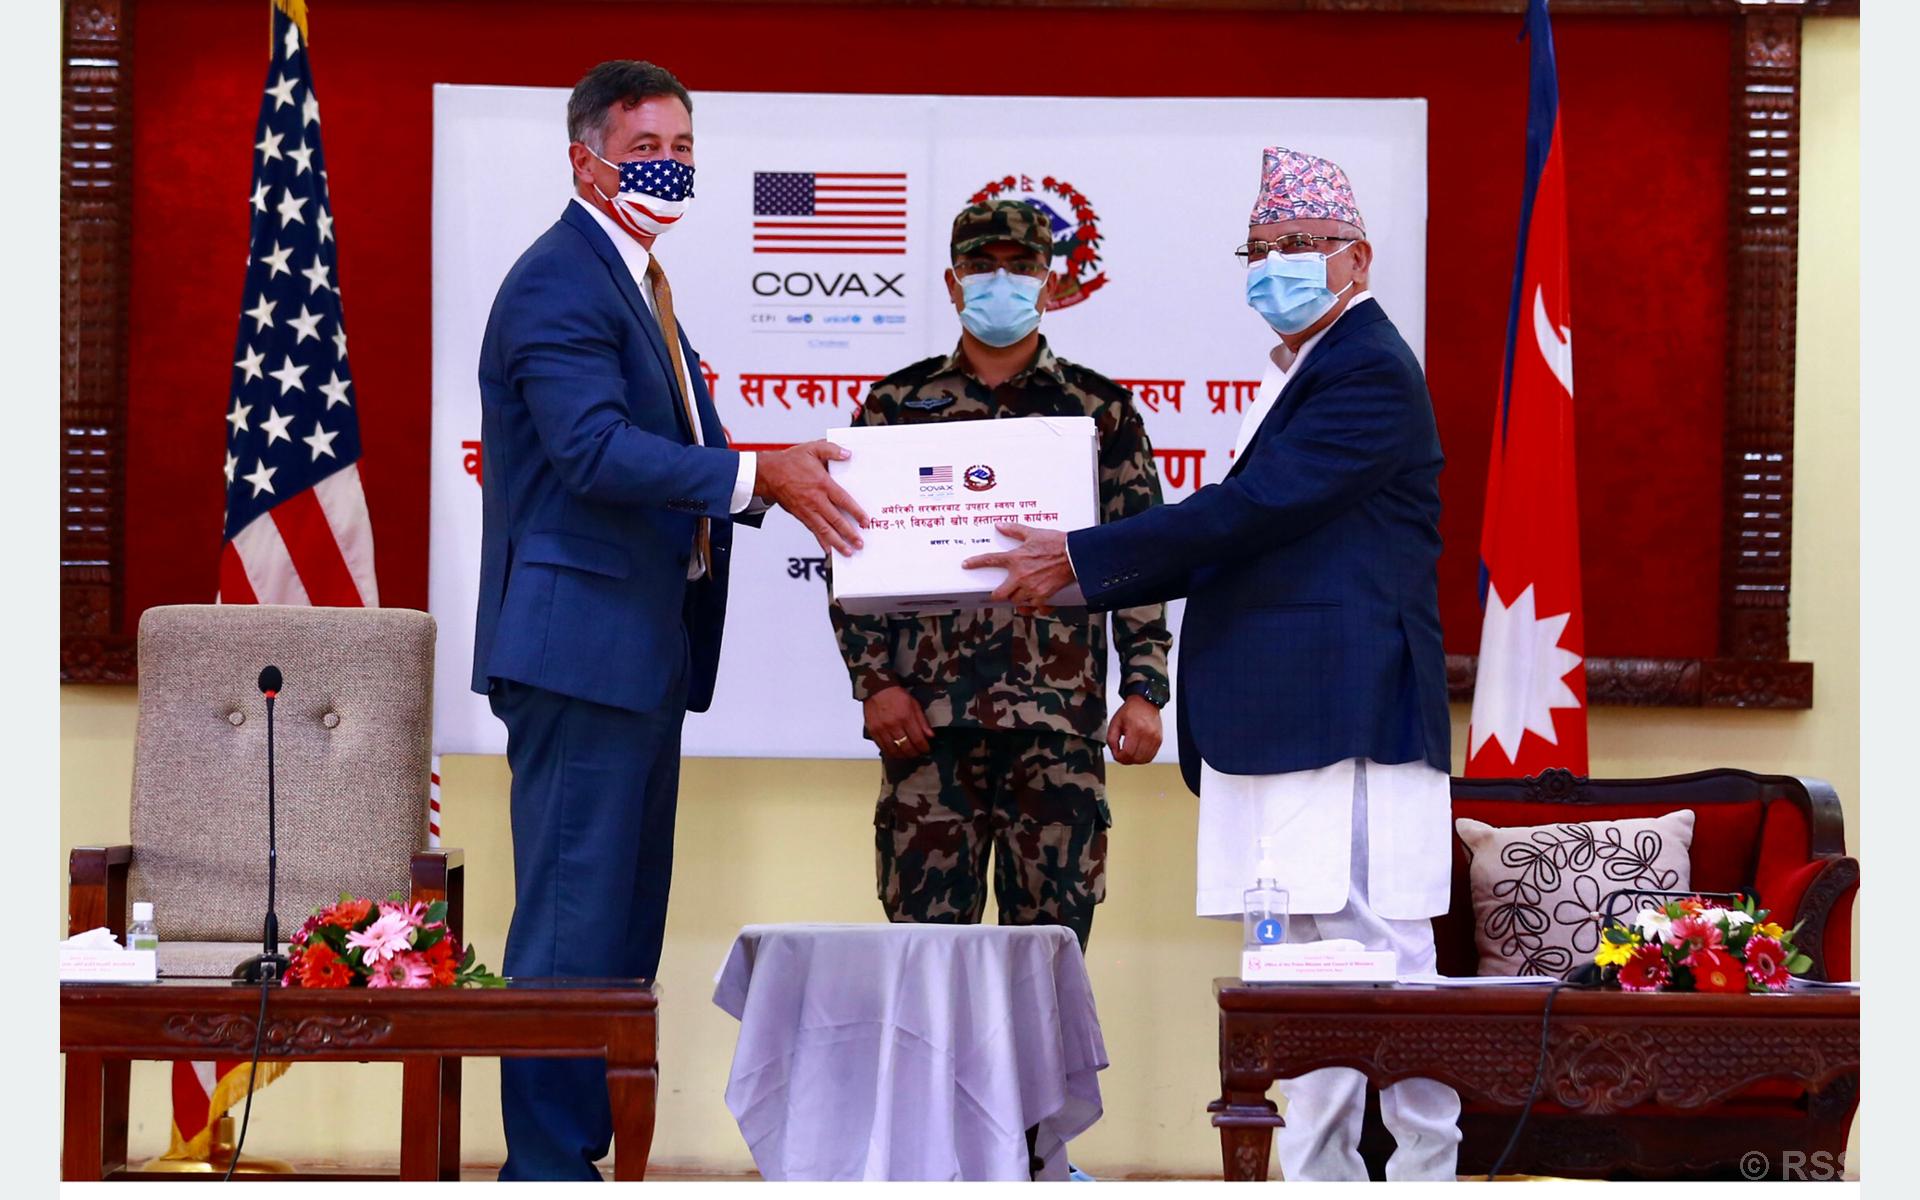 1.5 mln doses of COVID-19 vaccines from USA arrive in Kathmandu